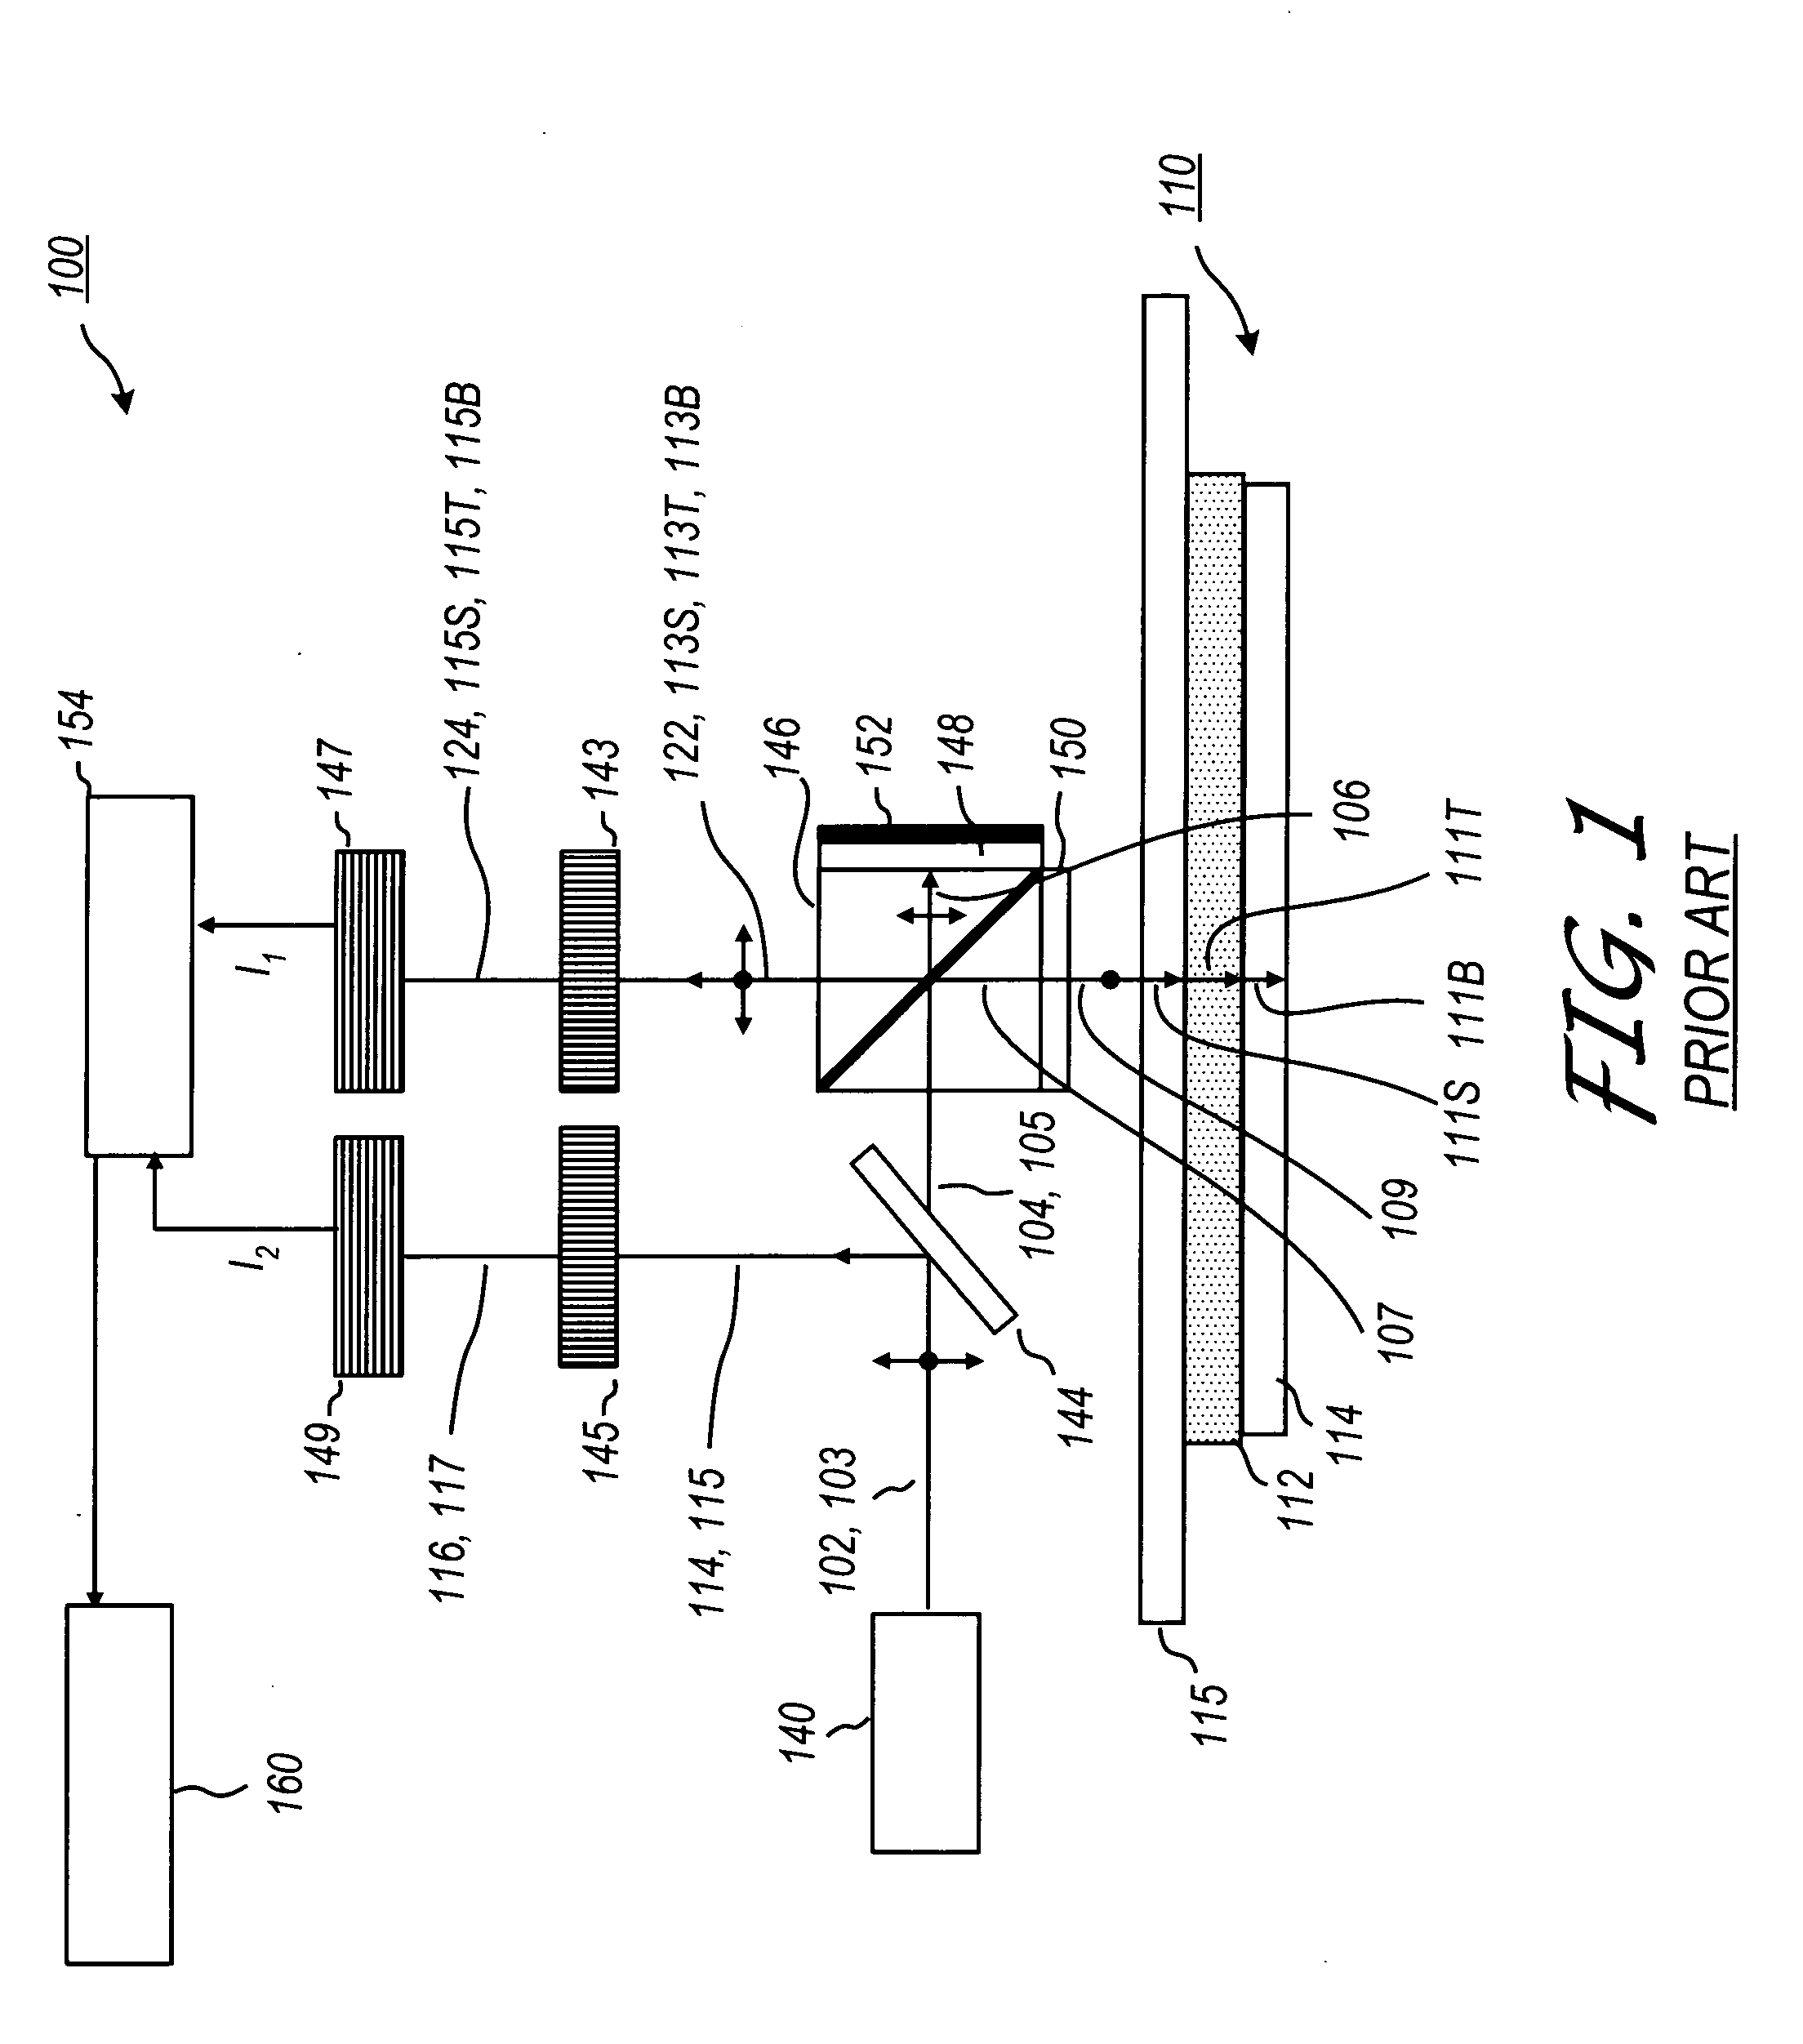 Method for monitoring film thickness using heterodyne reflectometry and grating interferometry